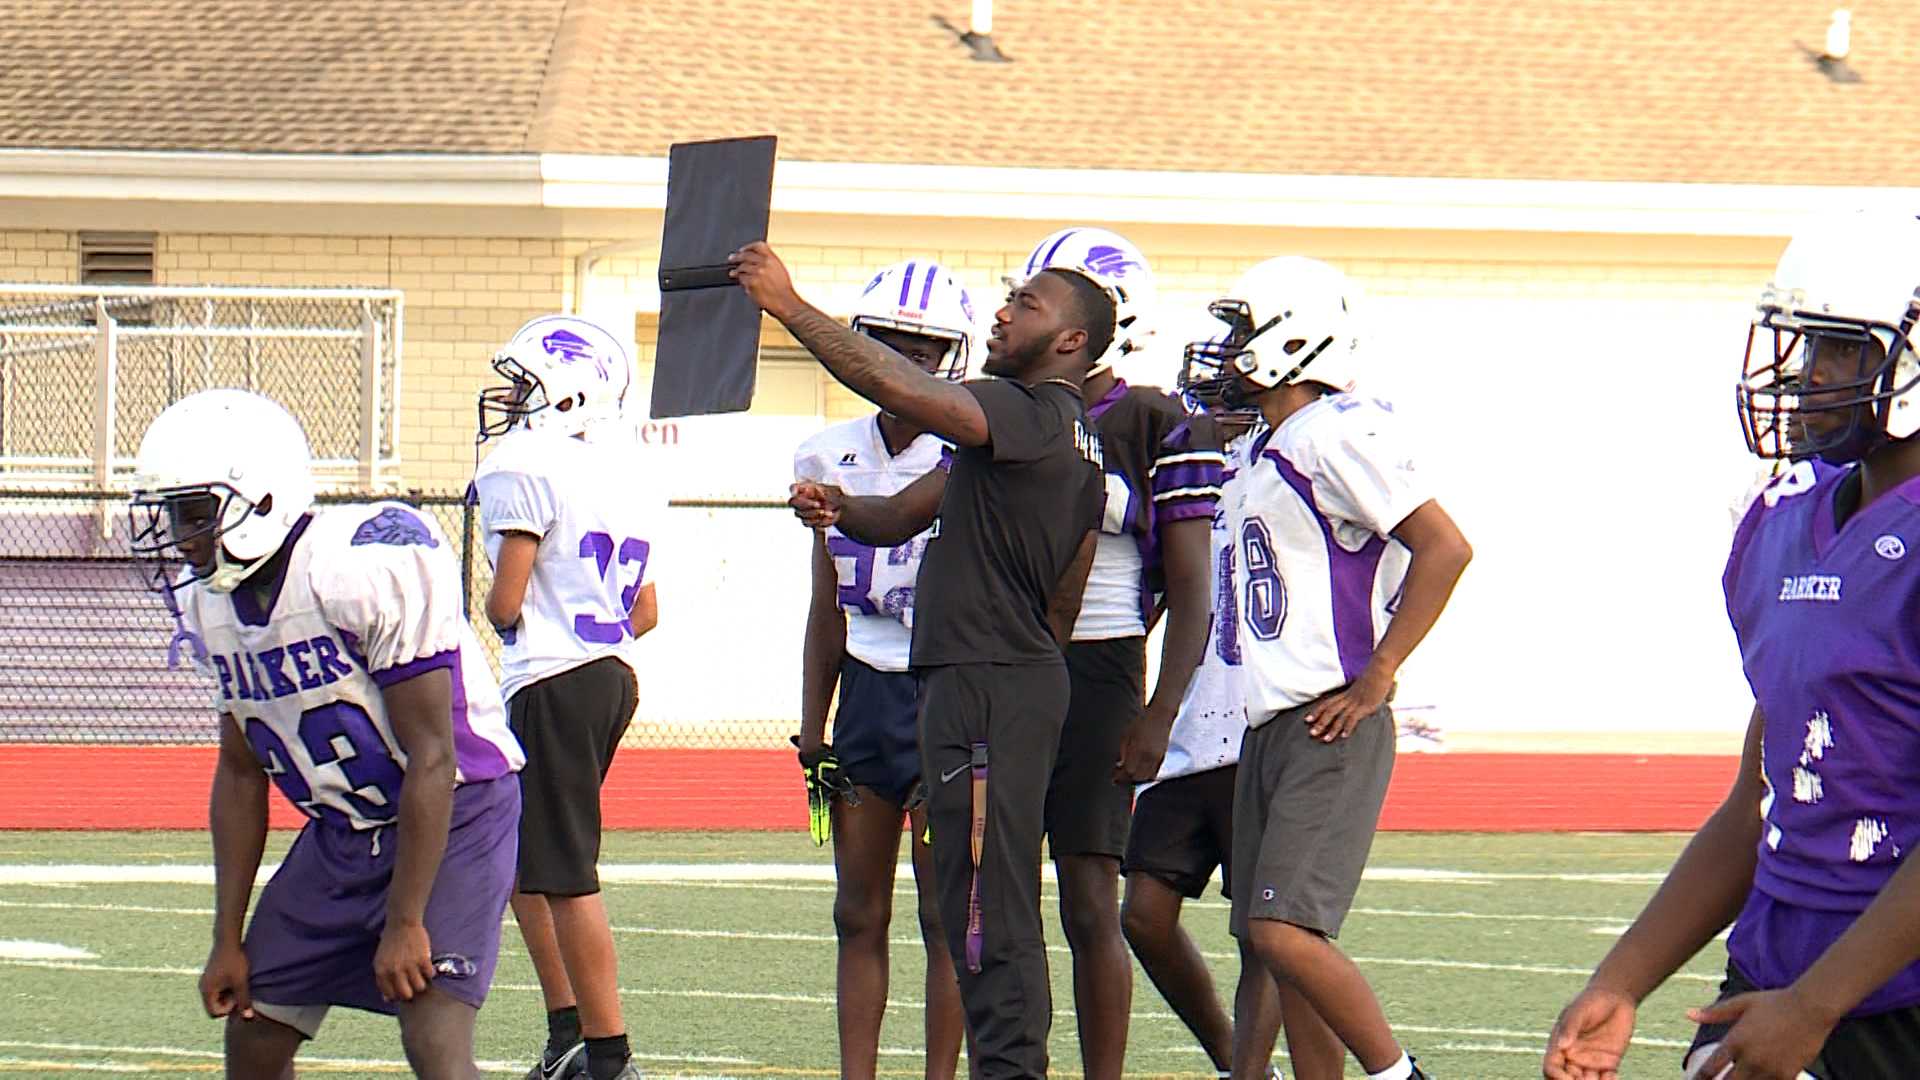 A.H. Parker High School's football team ready for season's first game next week